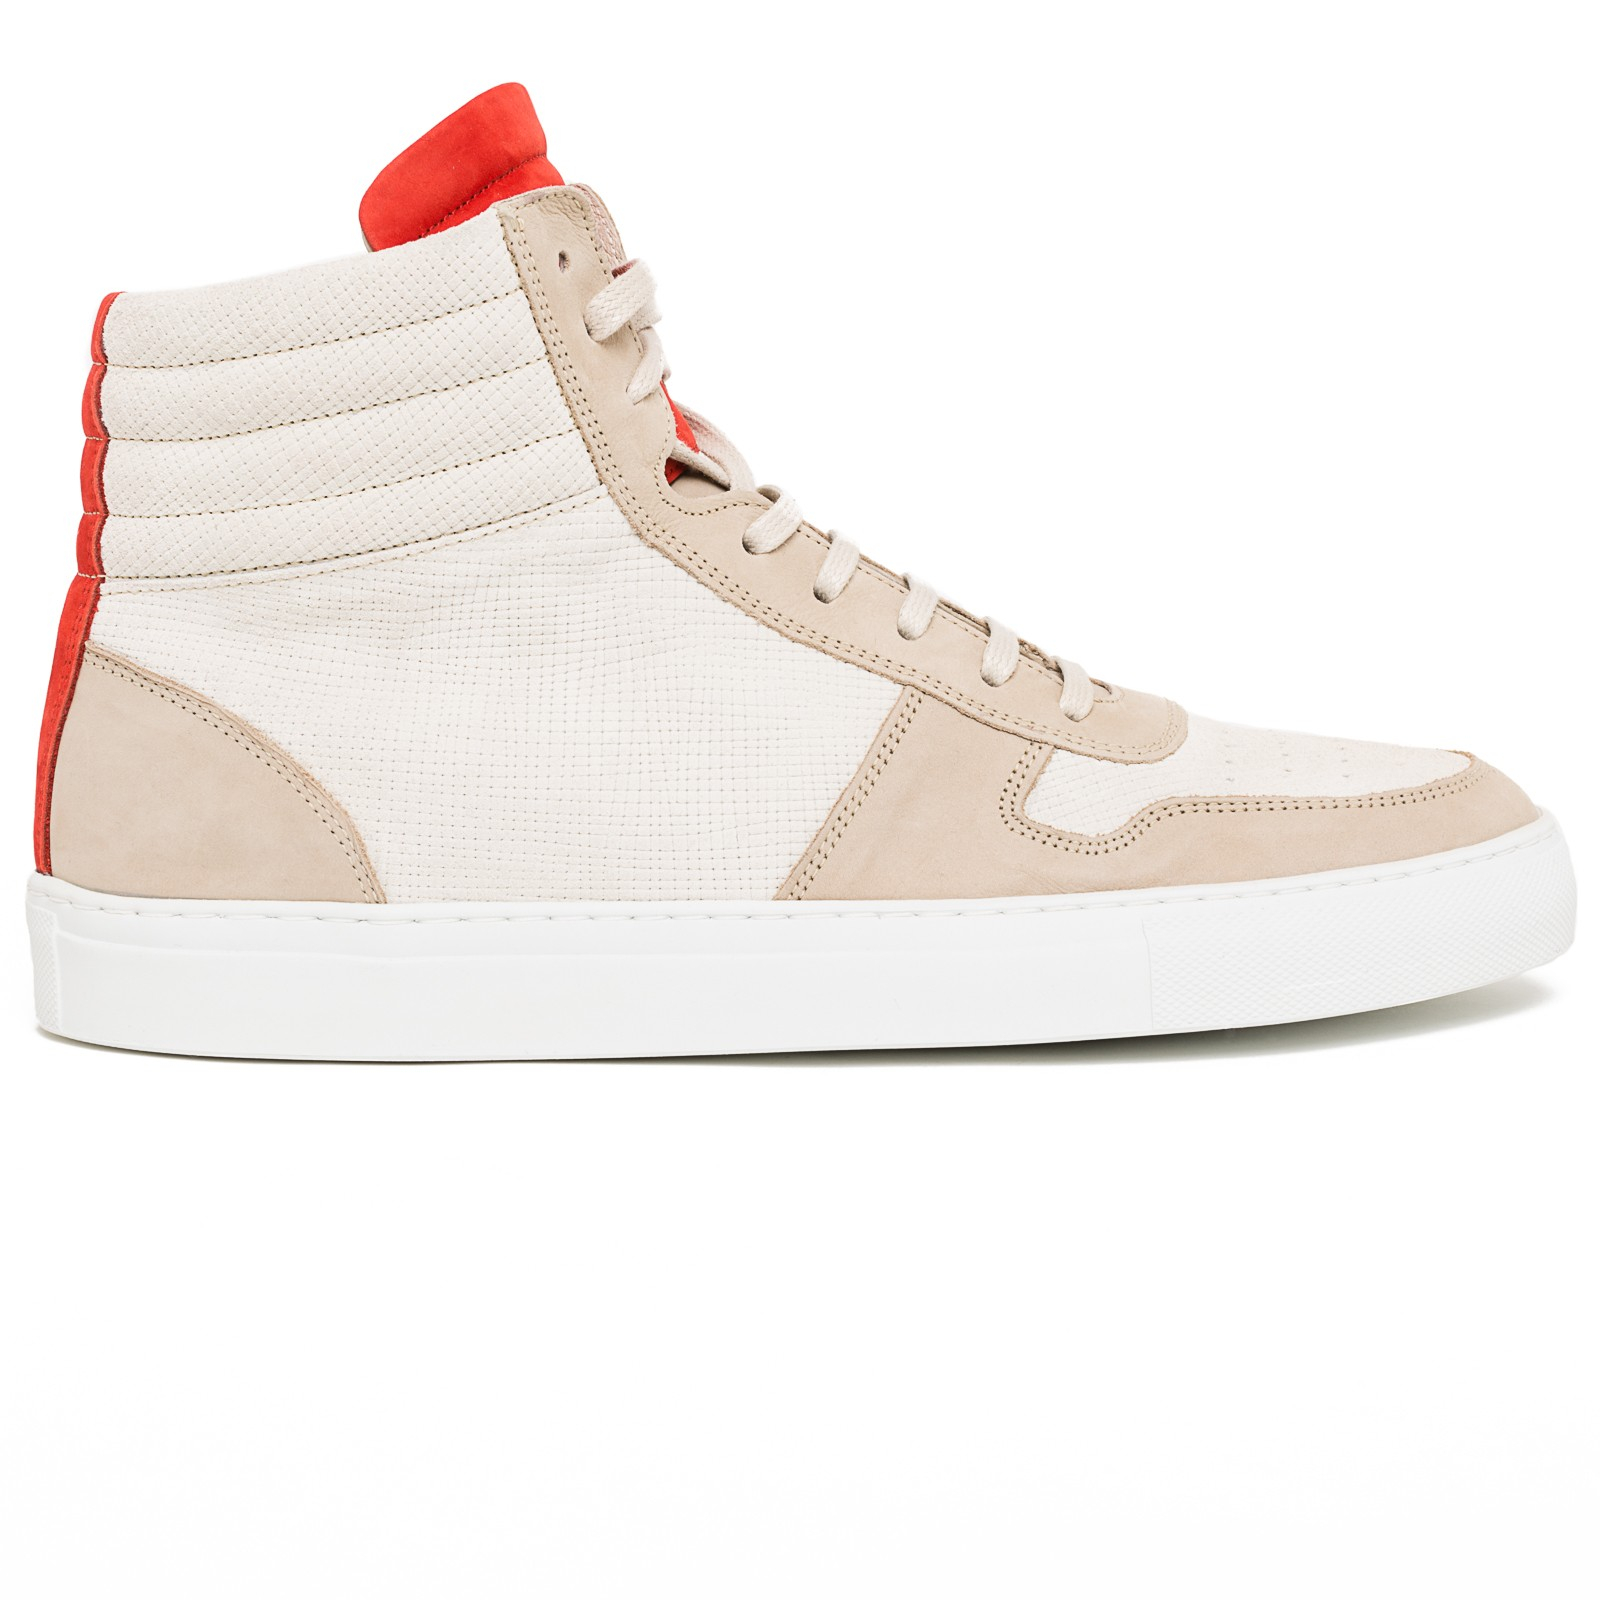 National Standard Edition 1 Suede And Leather High Top Sneakers in ...